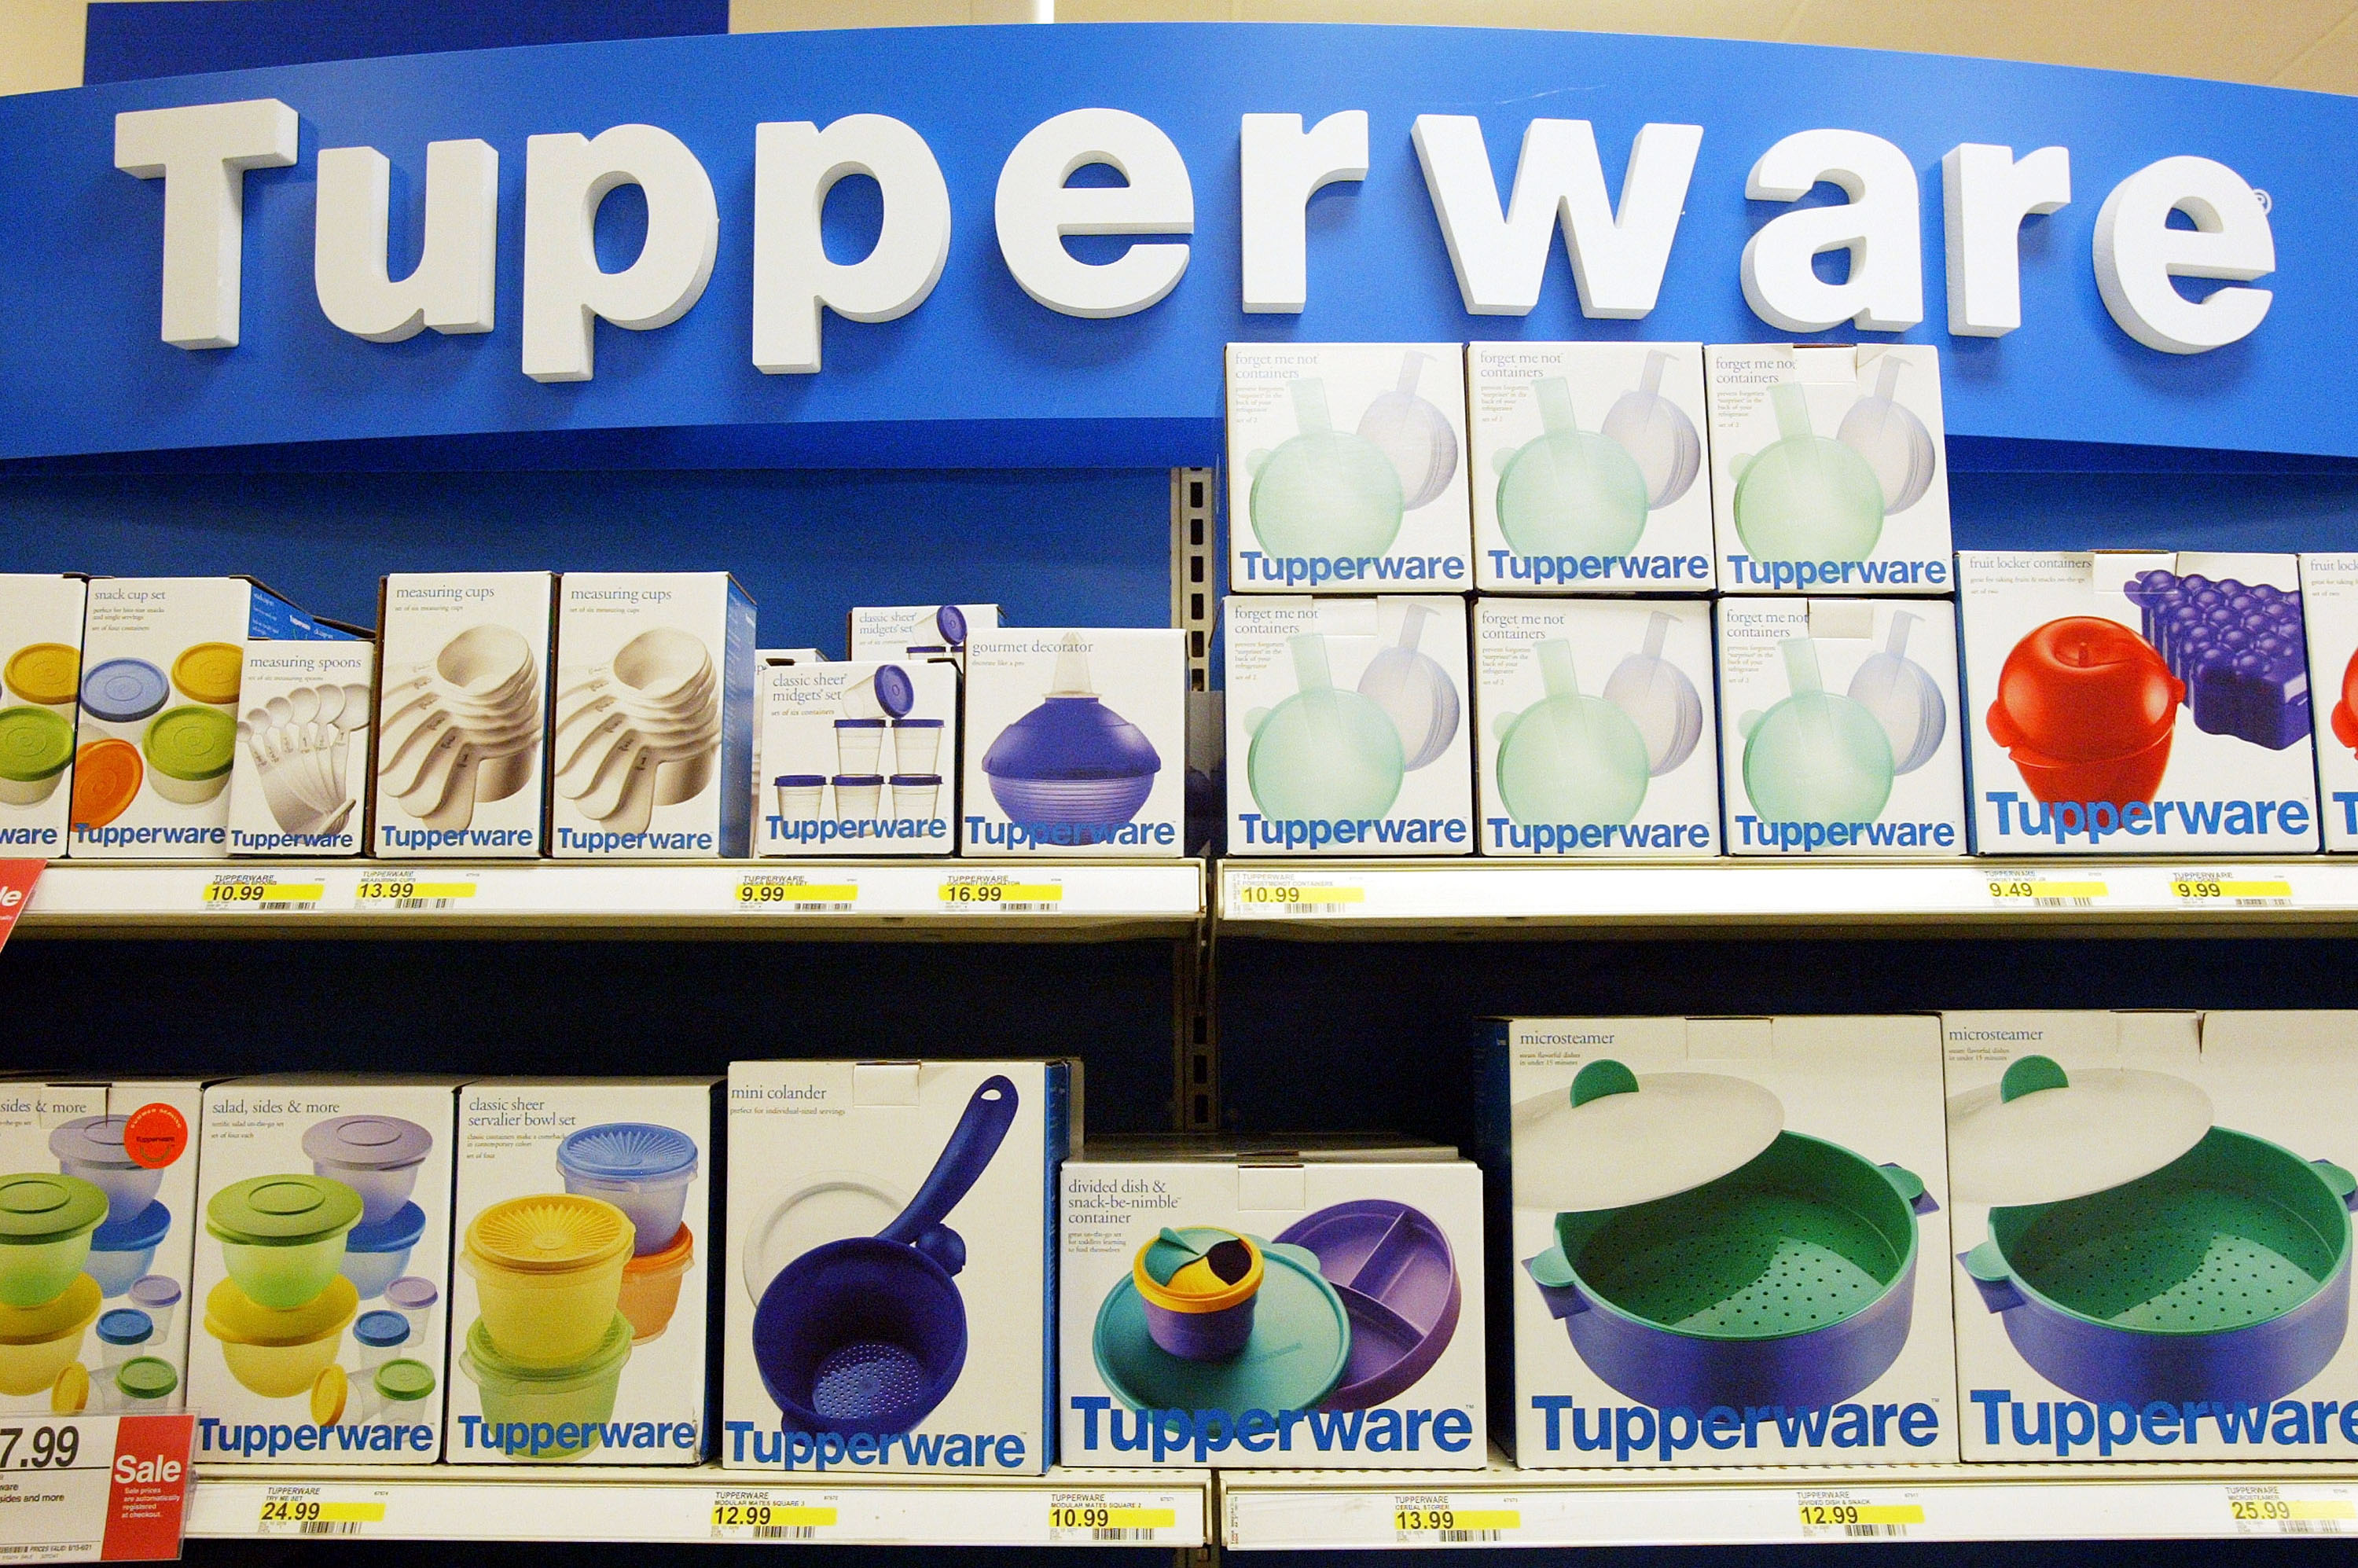 Tupperware could go out of business, but many are still relying on it